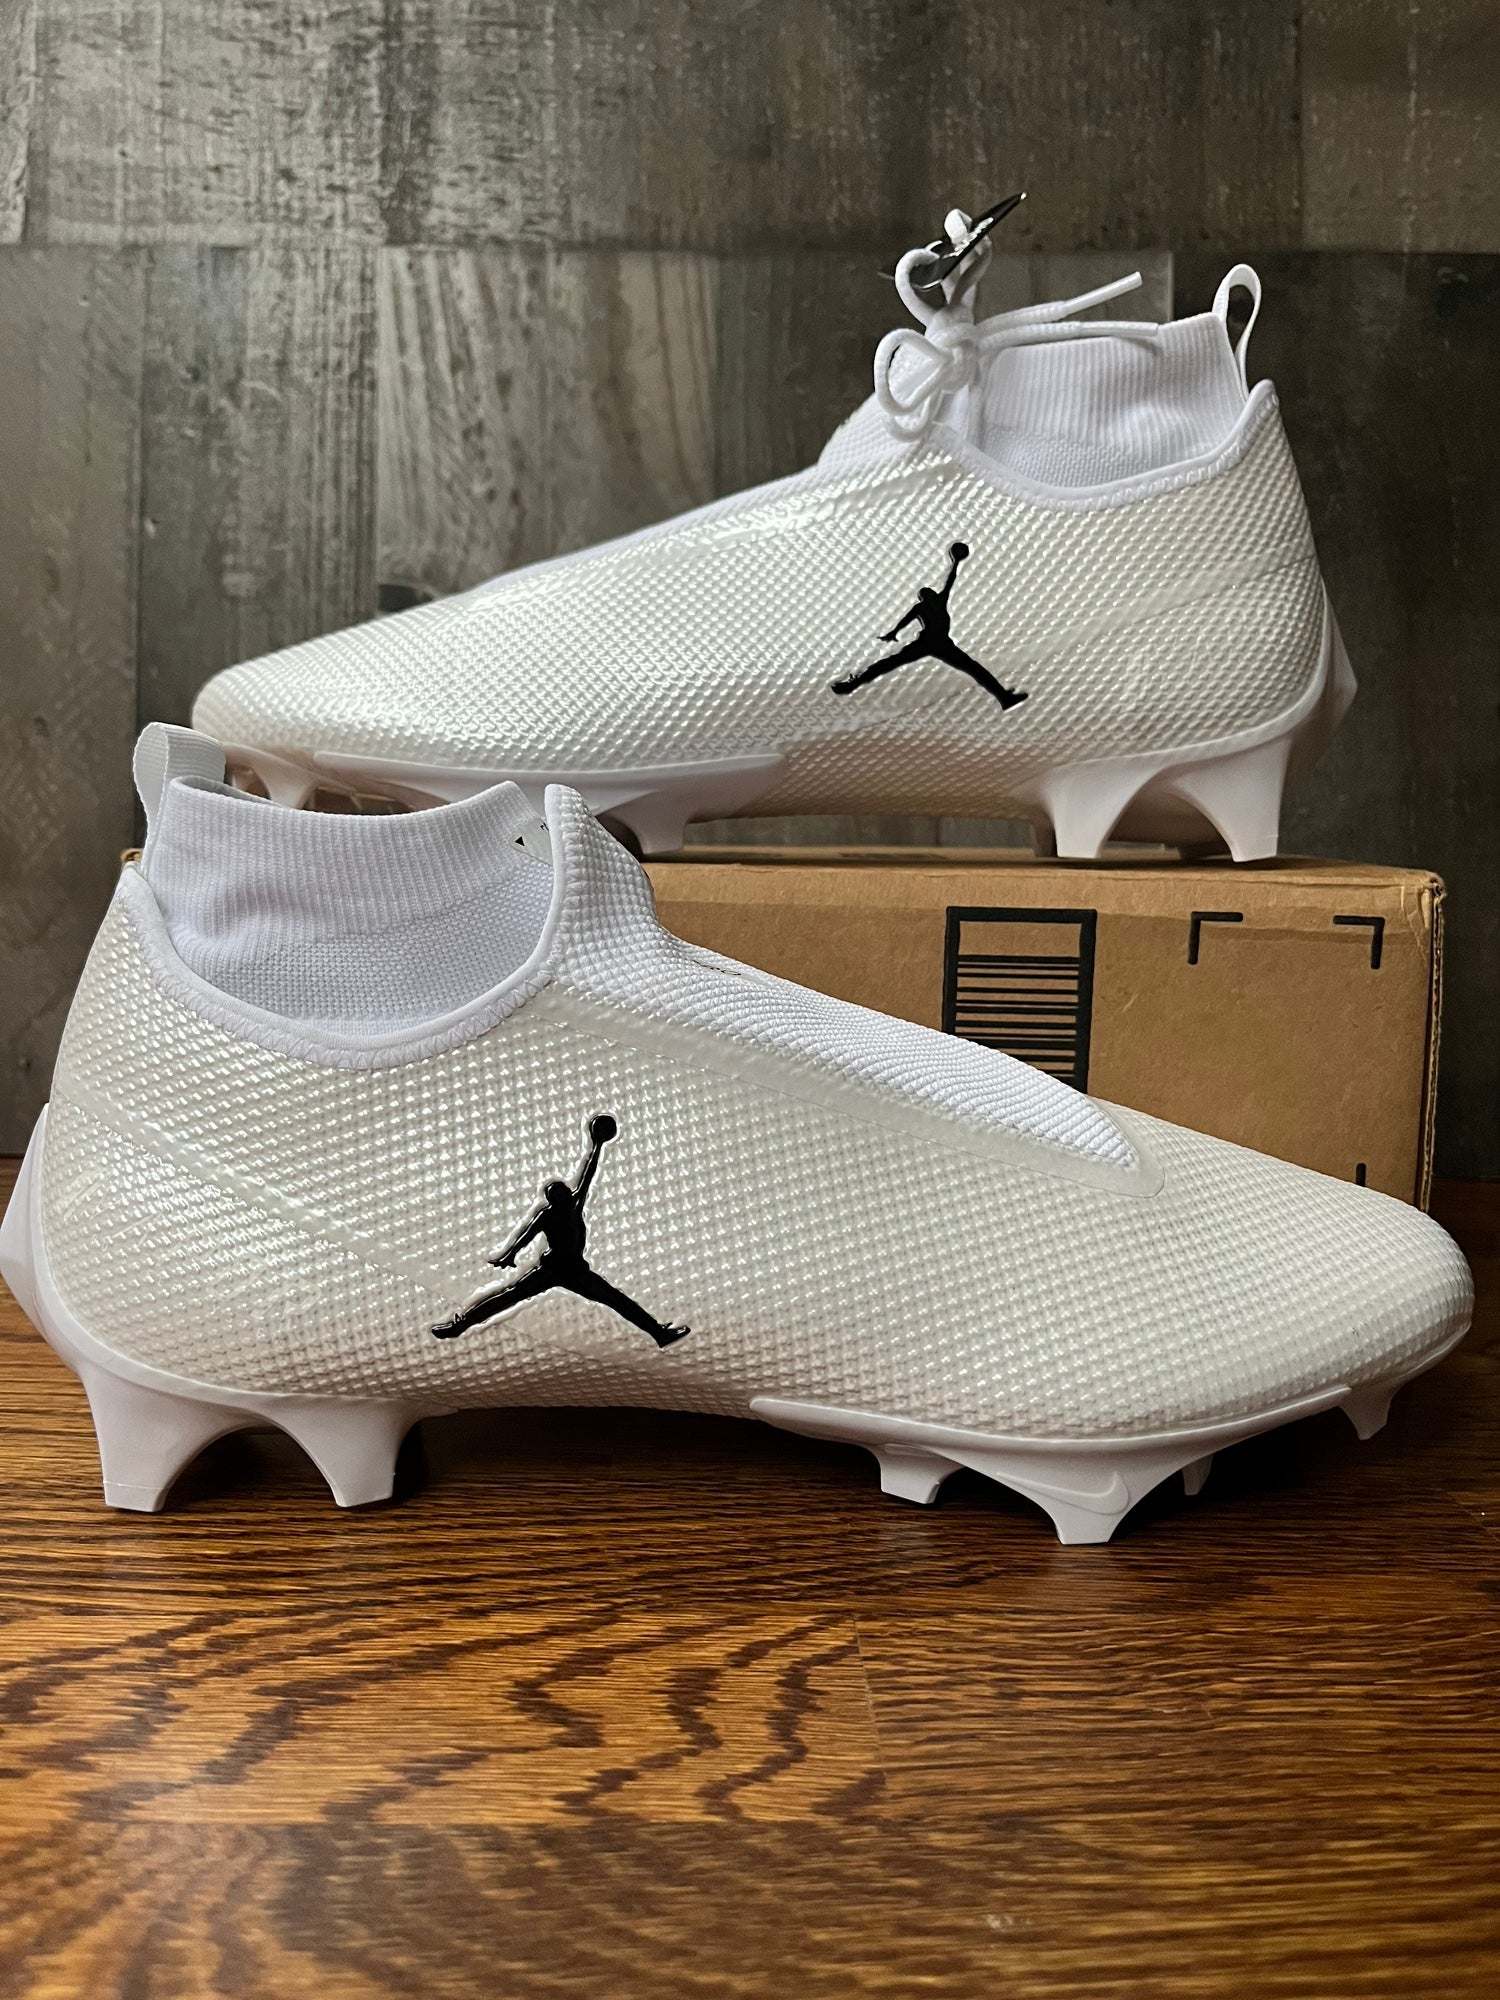 Jordan 11 Low Football Cleat EXTREMELY RARE FIND